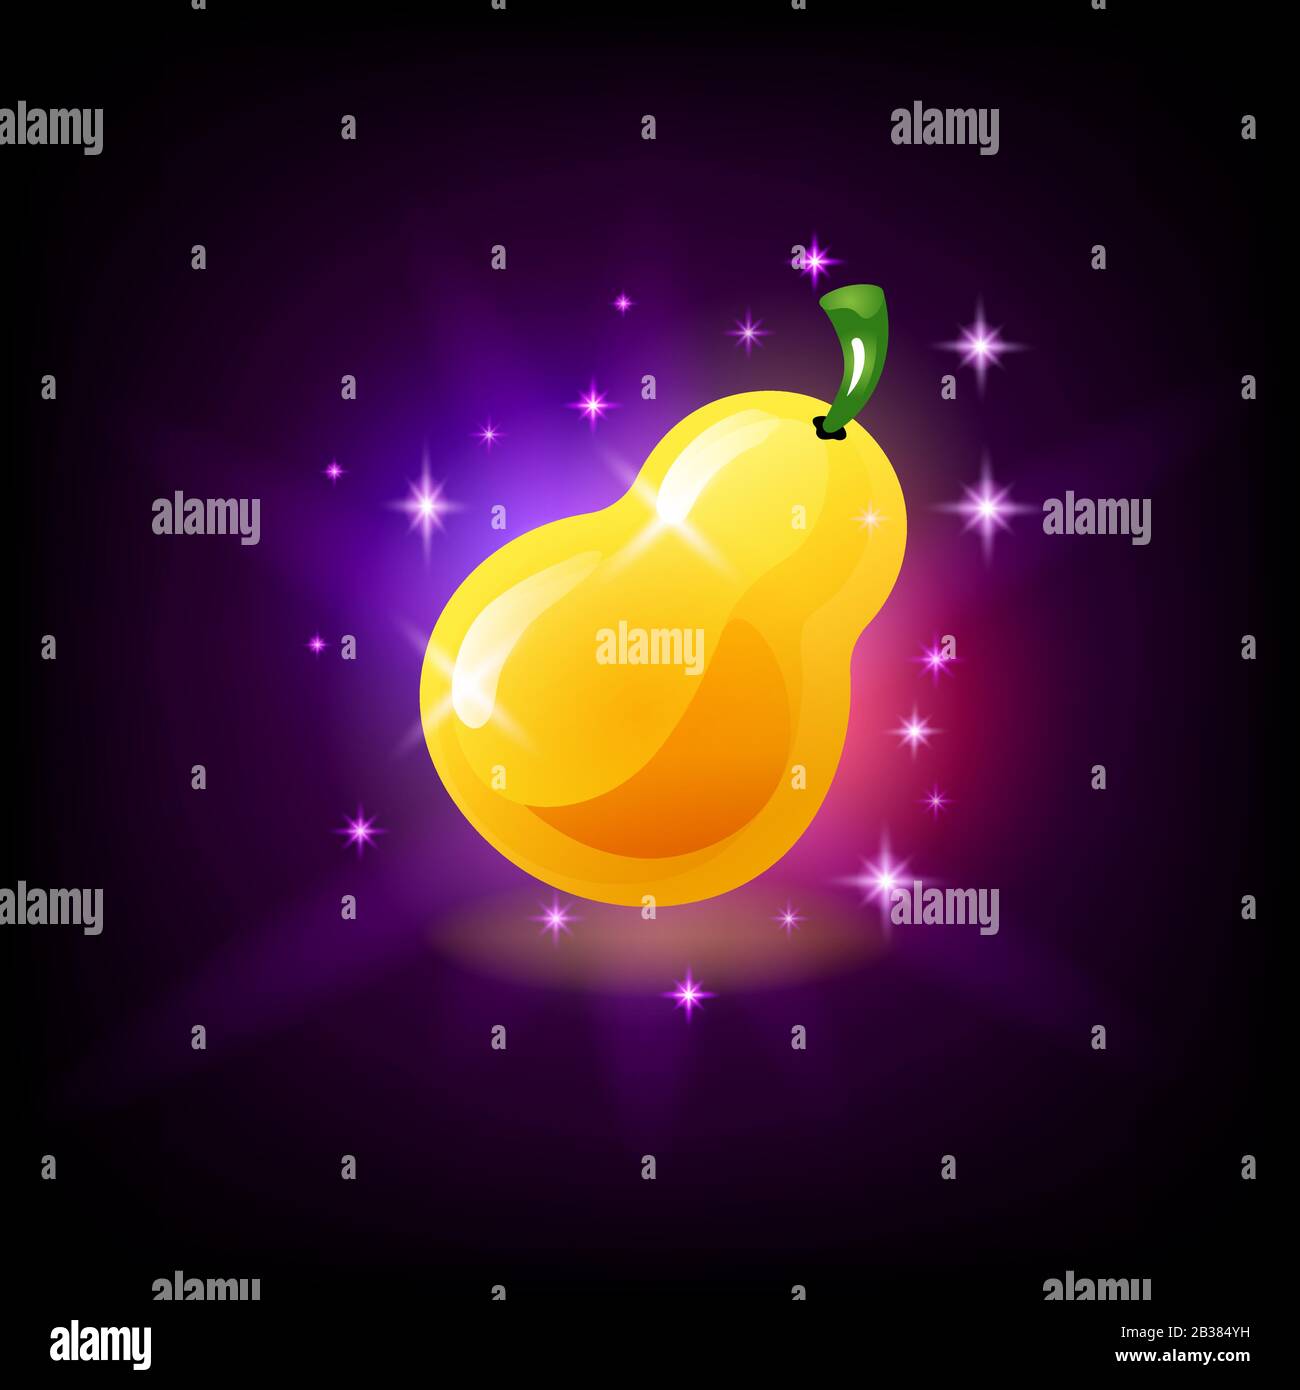 Glossy yellow ripe pear, fruit icon for slot machine, gambling game design element, vector illustration. Stock Vector